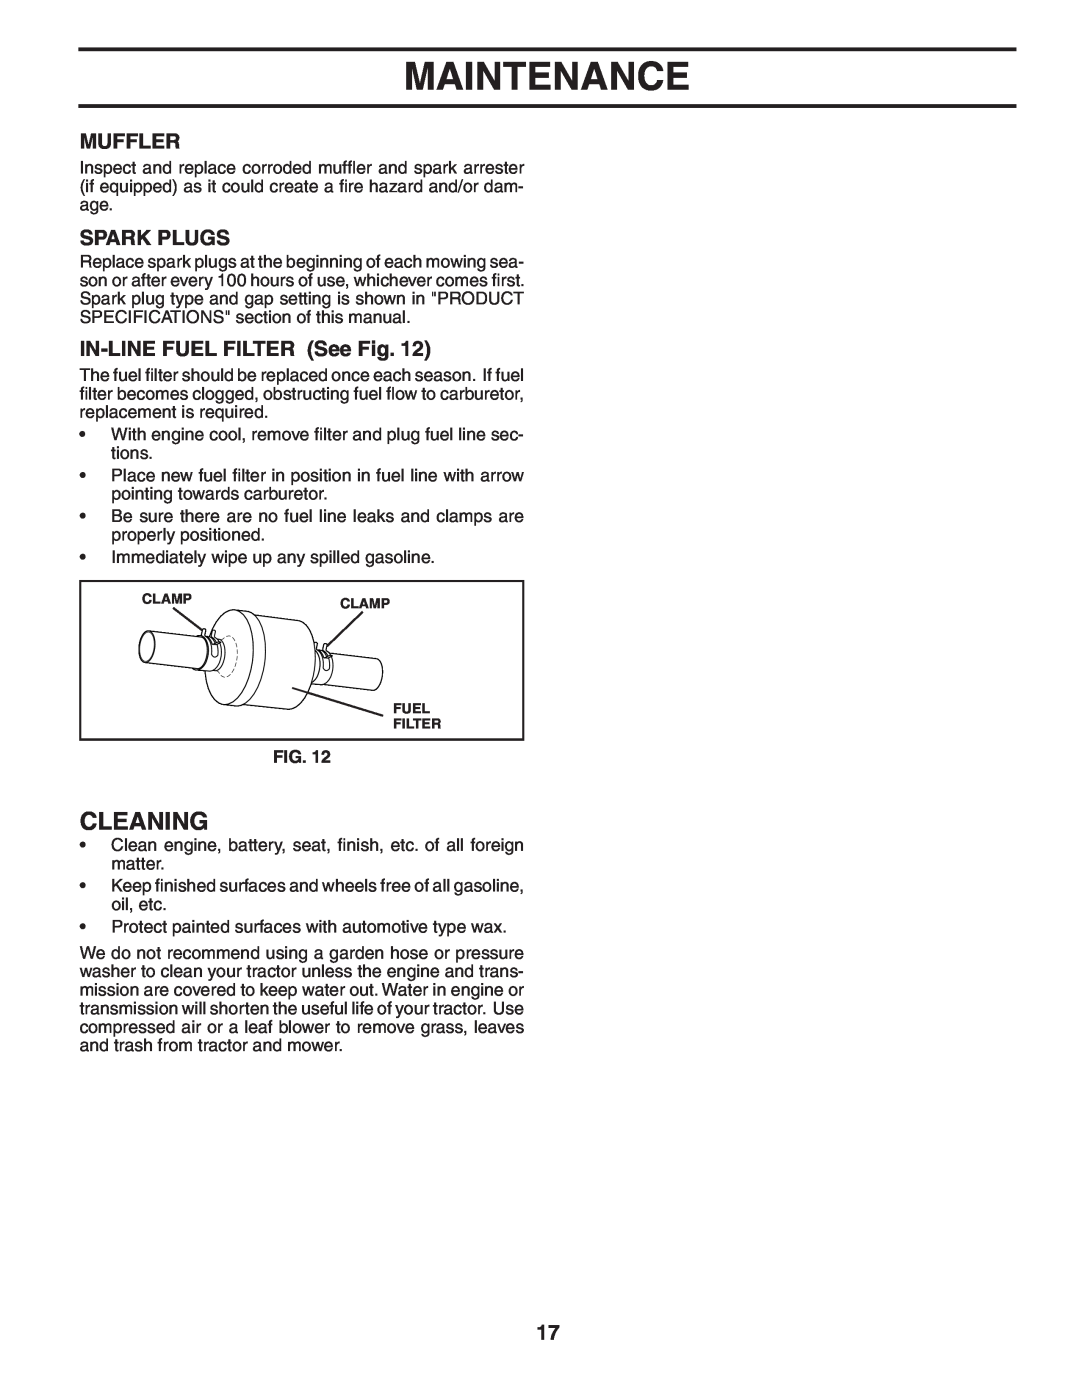 Weed Eater 191087 manual Cleaning, Muffler, Spark Plugs, IN-LINE FUEL FILTER See Fig, Maintenance 